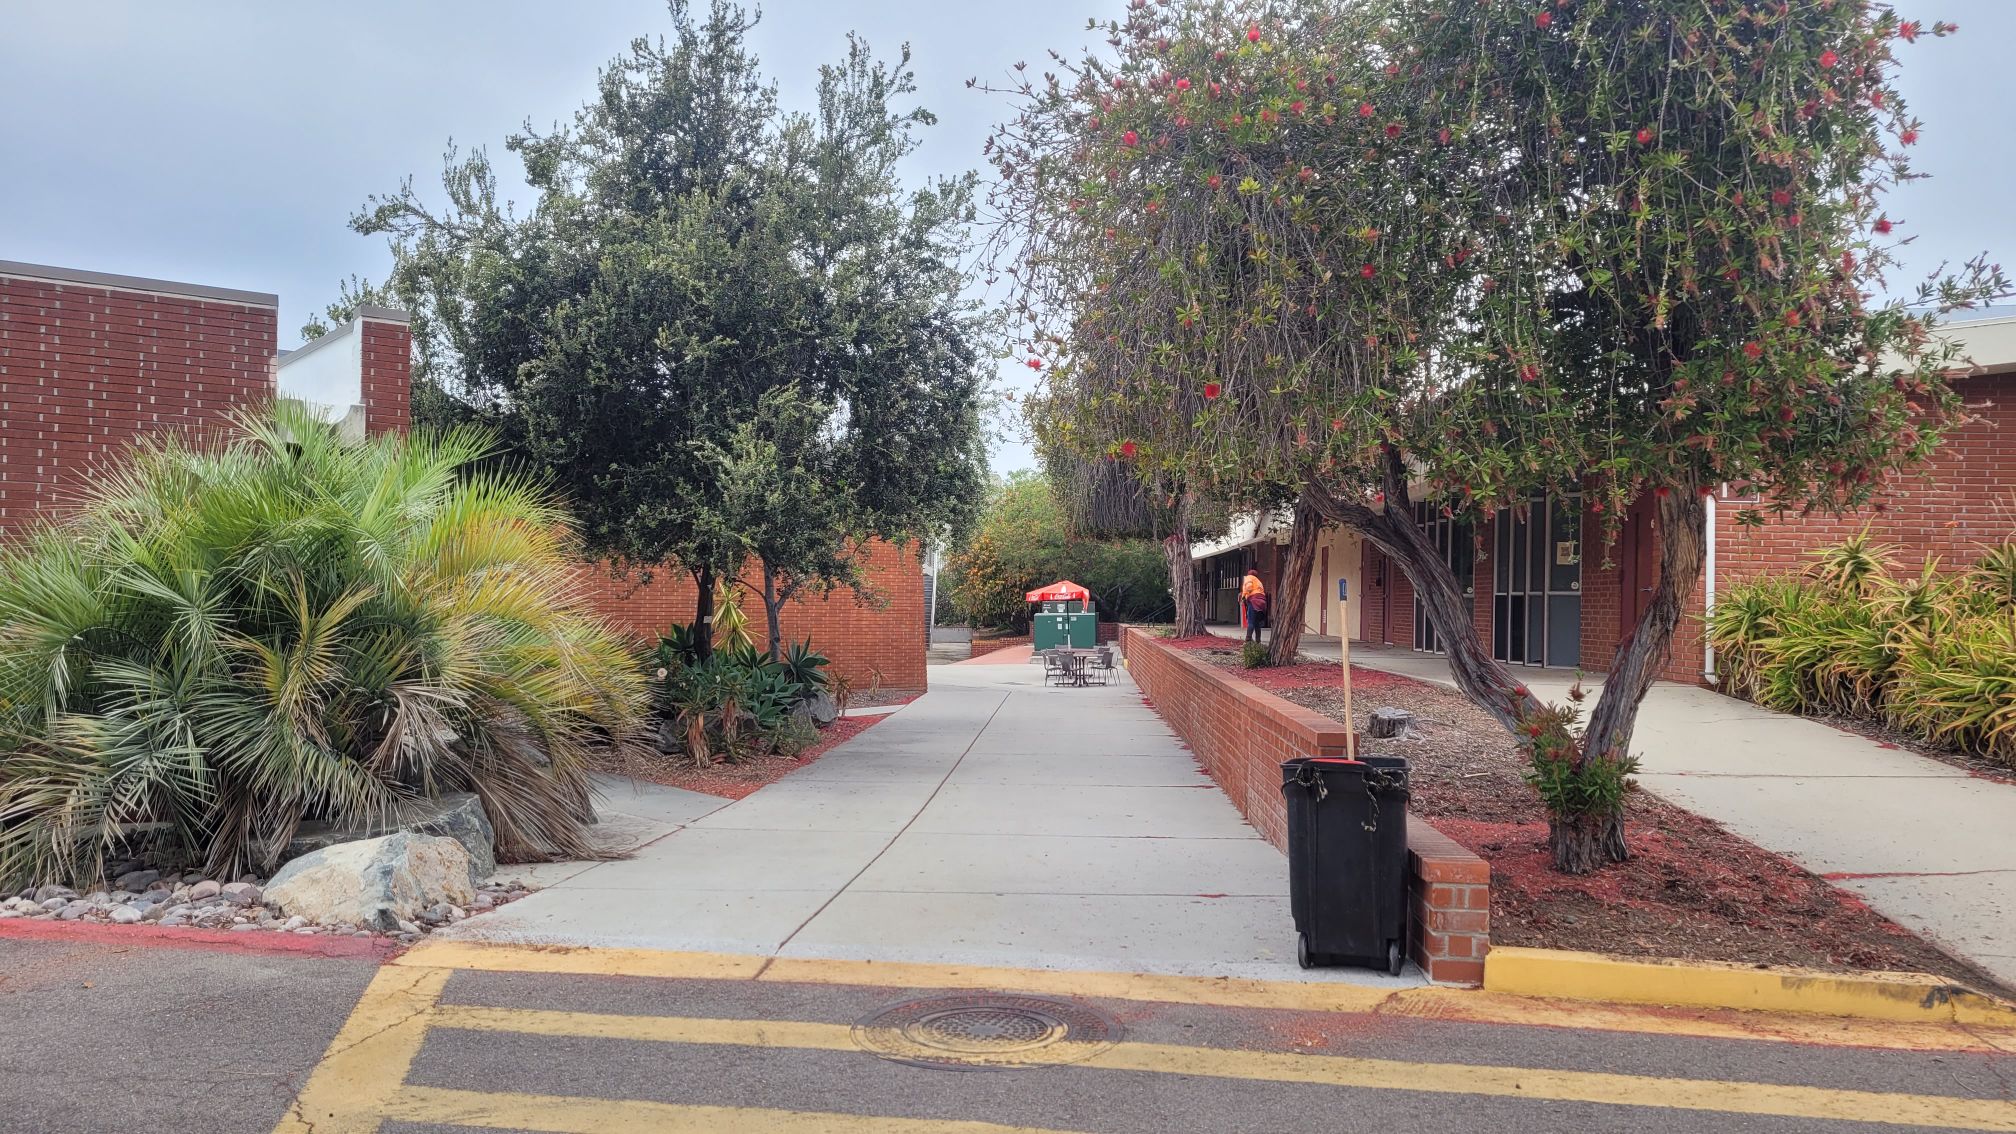 A walkway between two red brick buildings and trees.